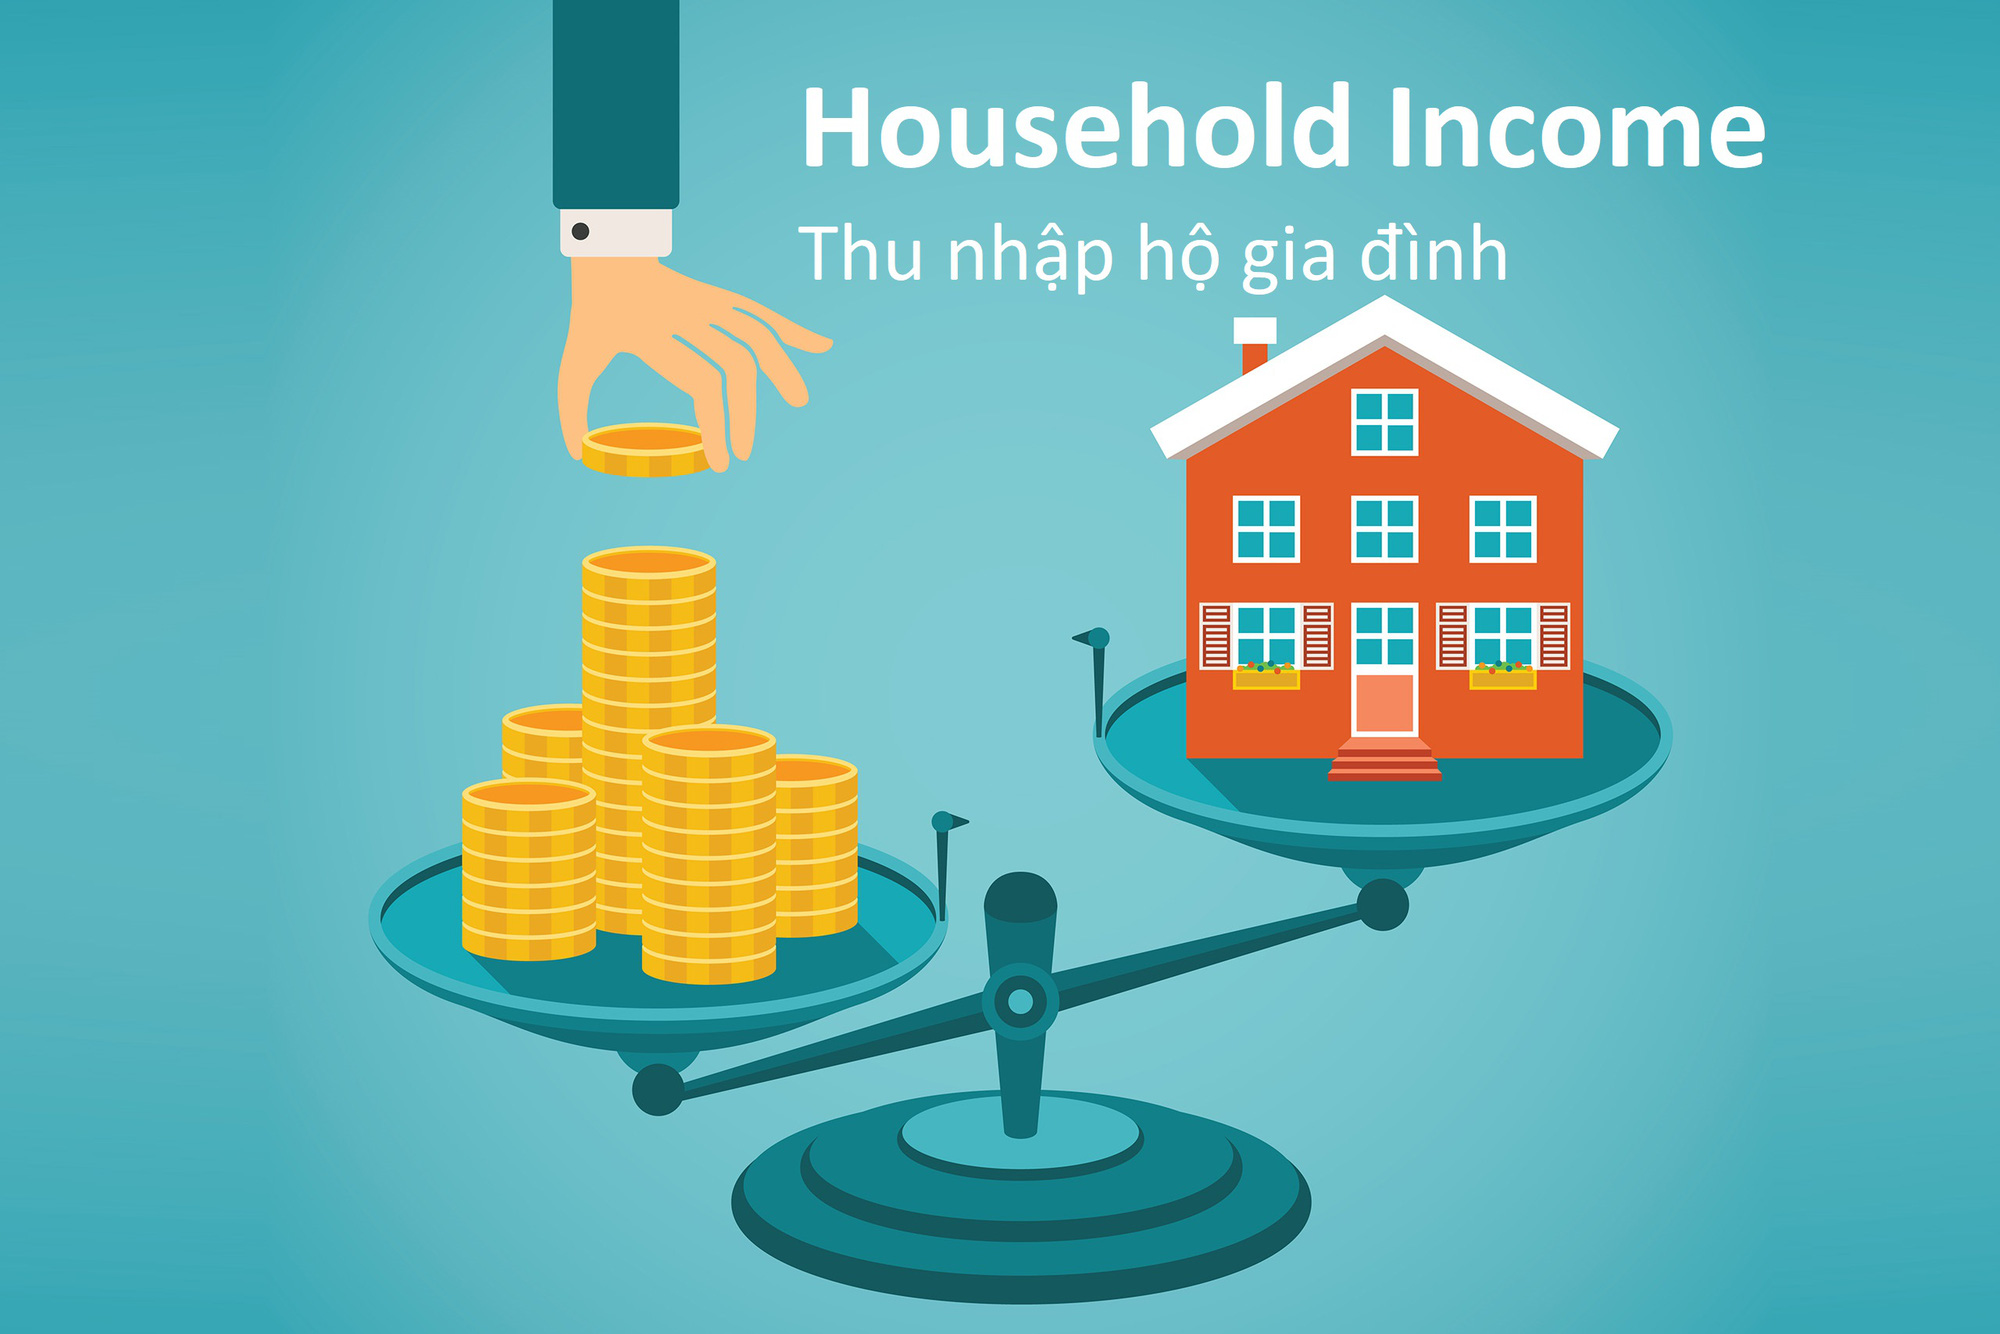 How to register an individual business household in Vietnam?